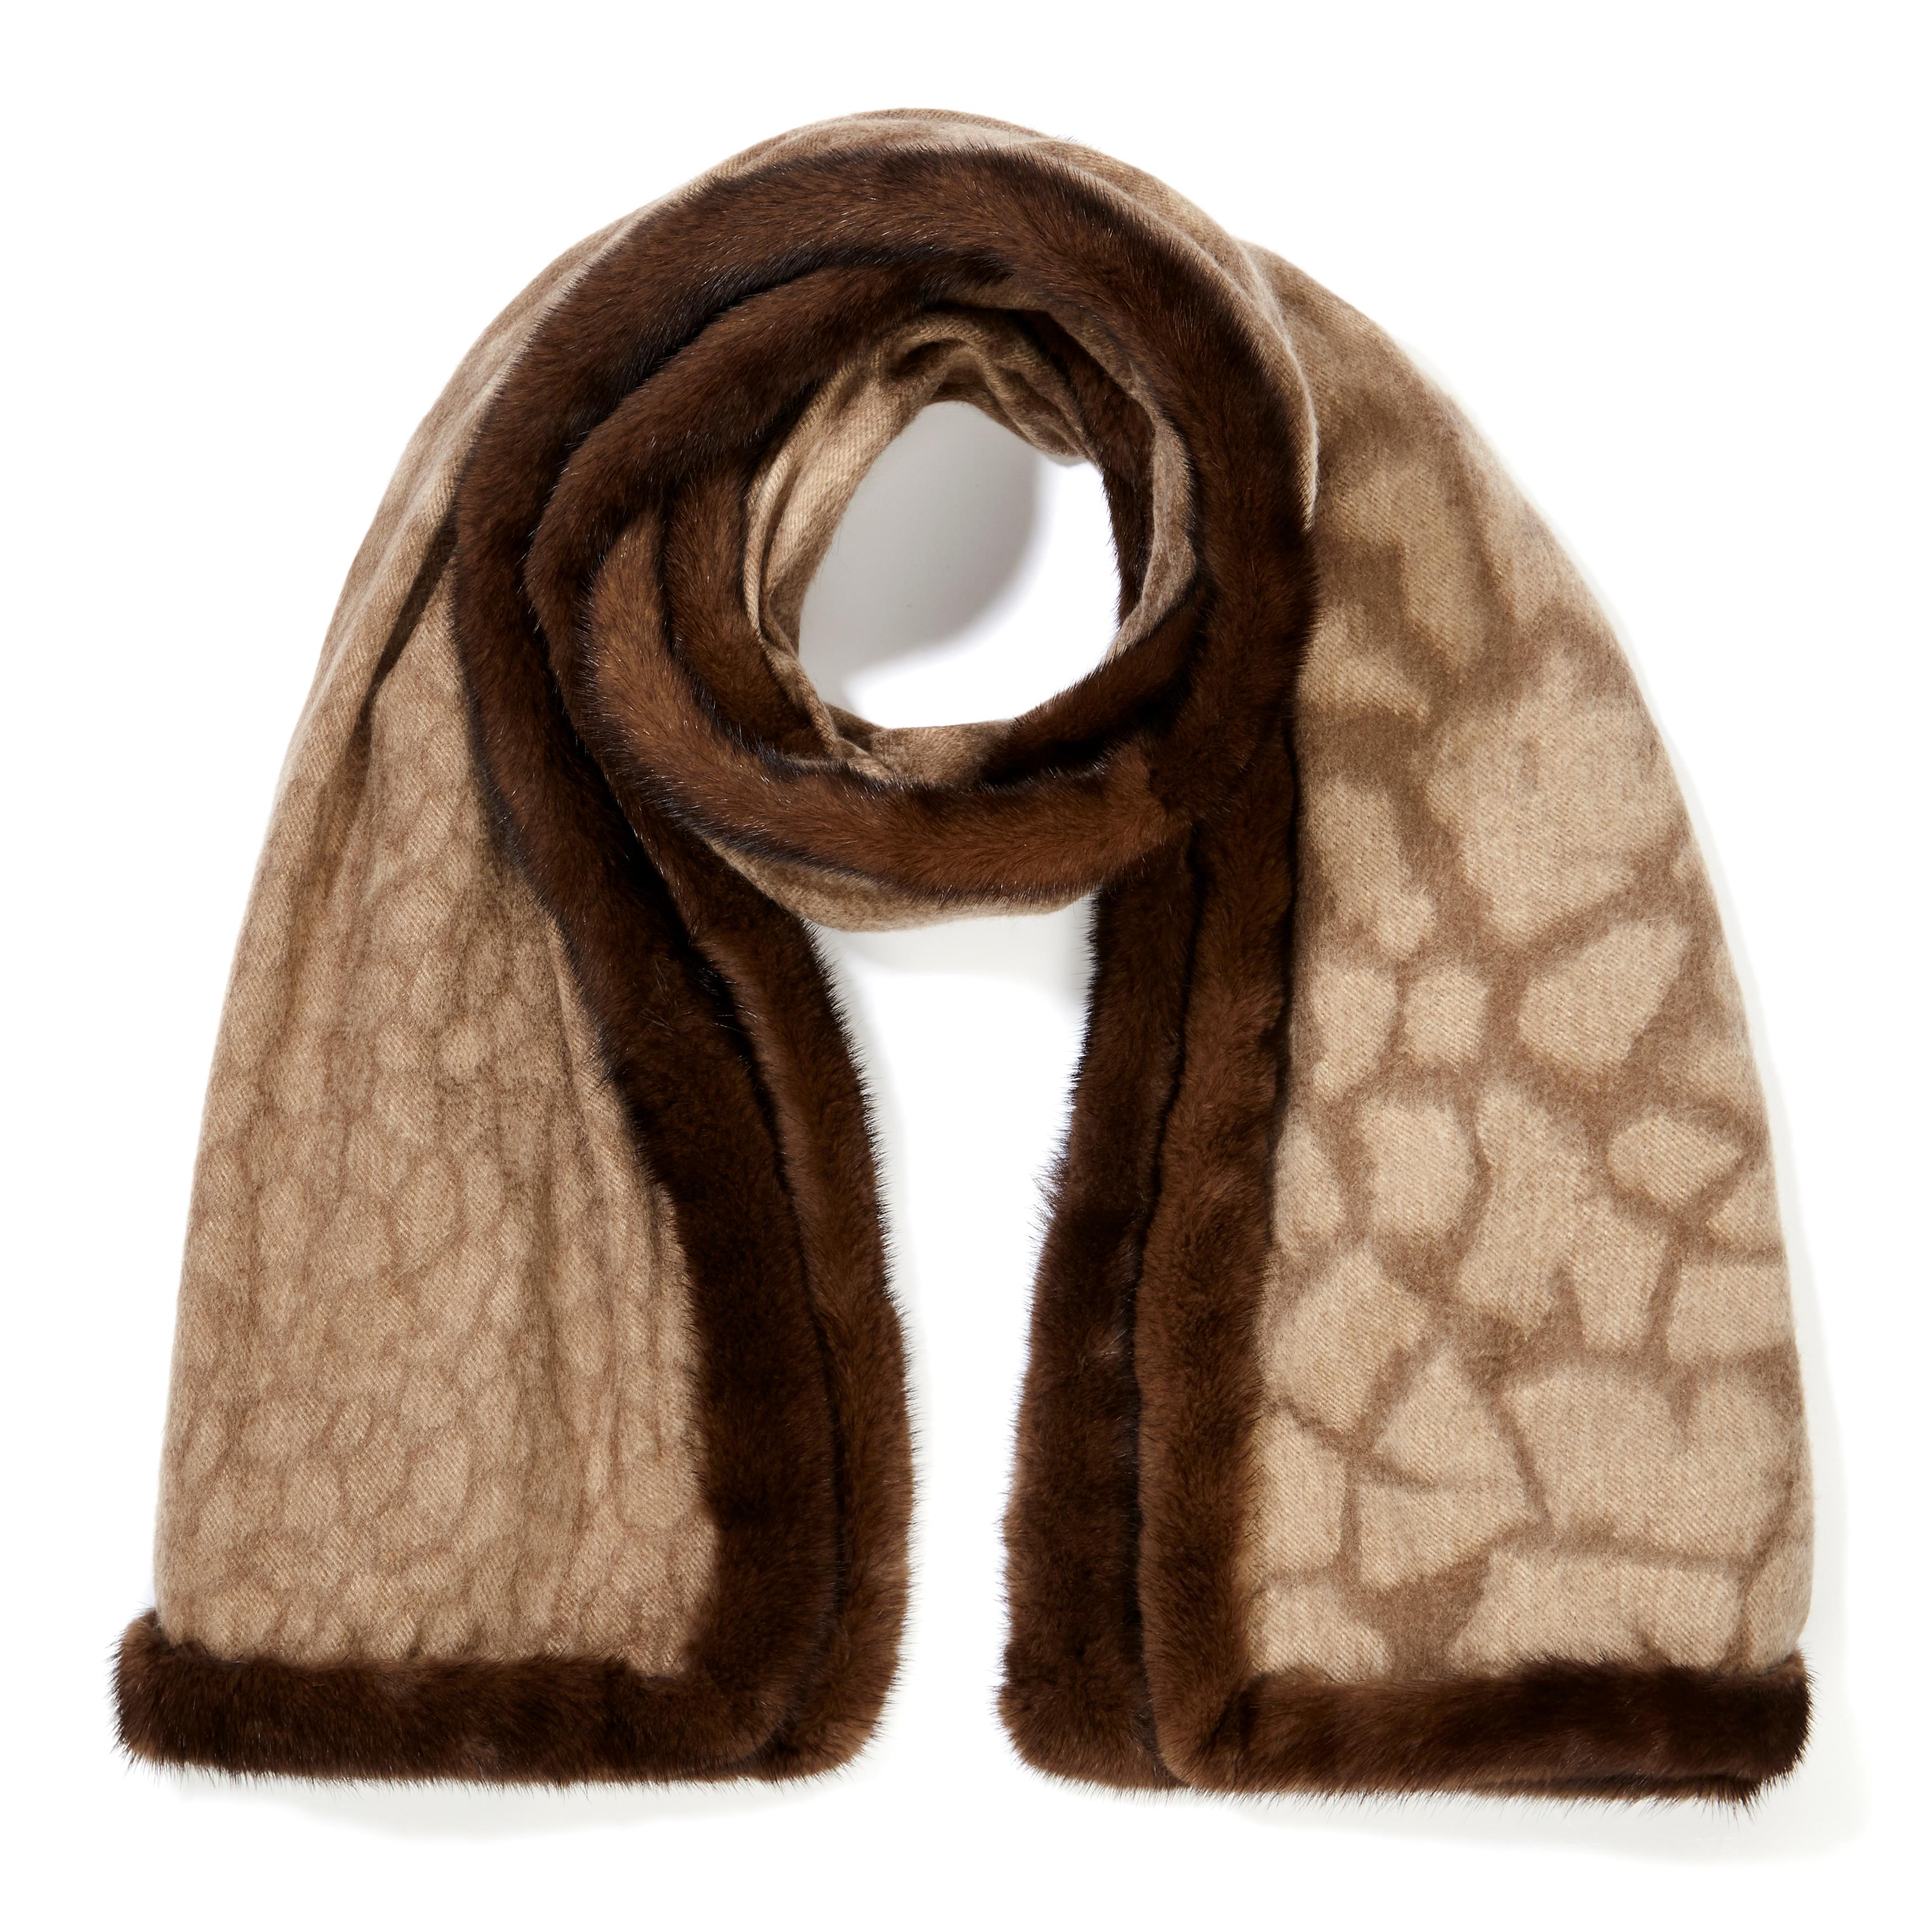 Verheyen London Mink Fur Trimmed Cashmere Shawl Scarf in Brown Leopard - New 

Verheyen London’s shawl is spun from the finest Scottish woven cashmere and finished with the most exquisite dyed mink. Its warmth envelopes you with luxury, perfect for